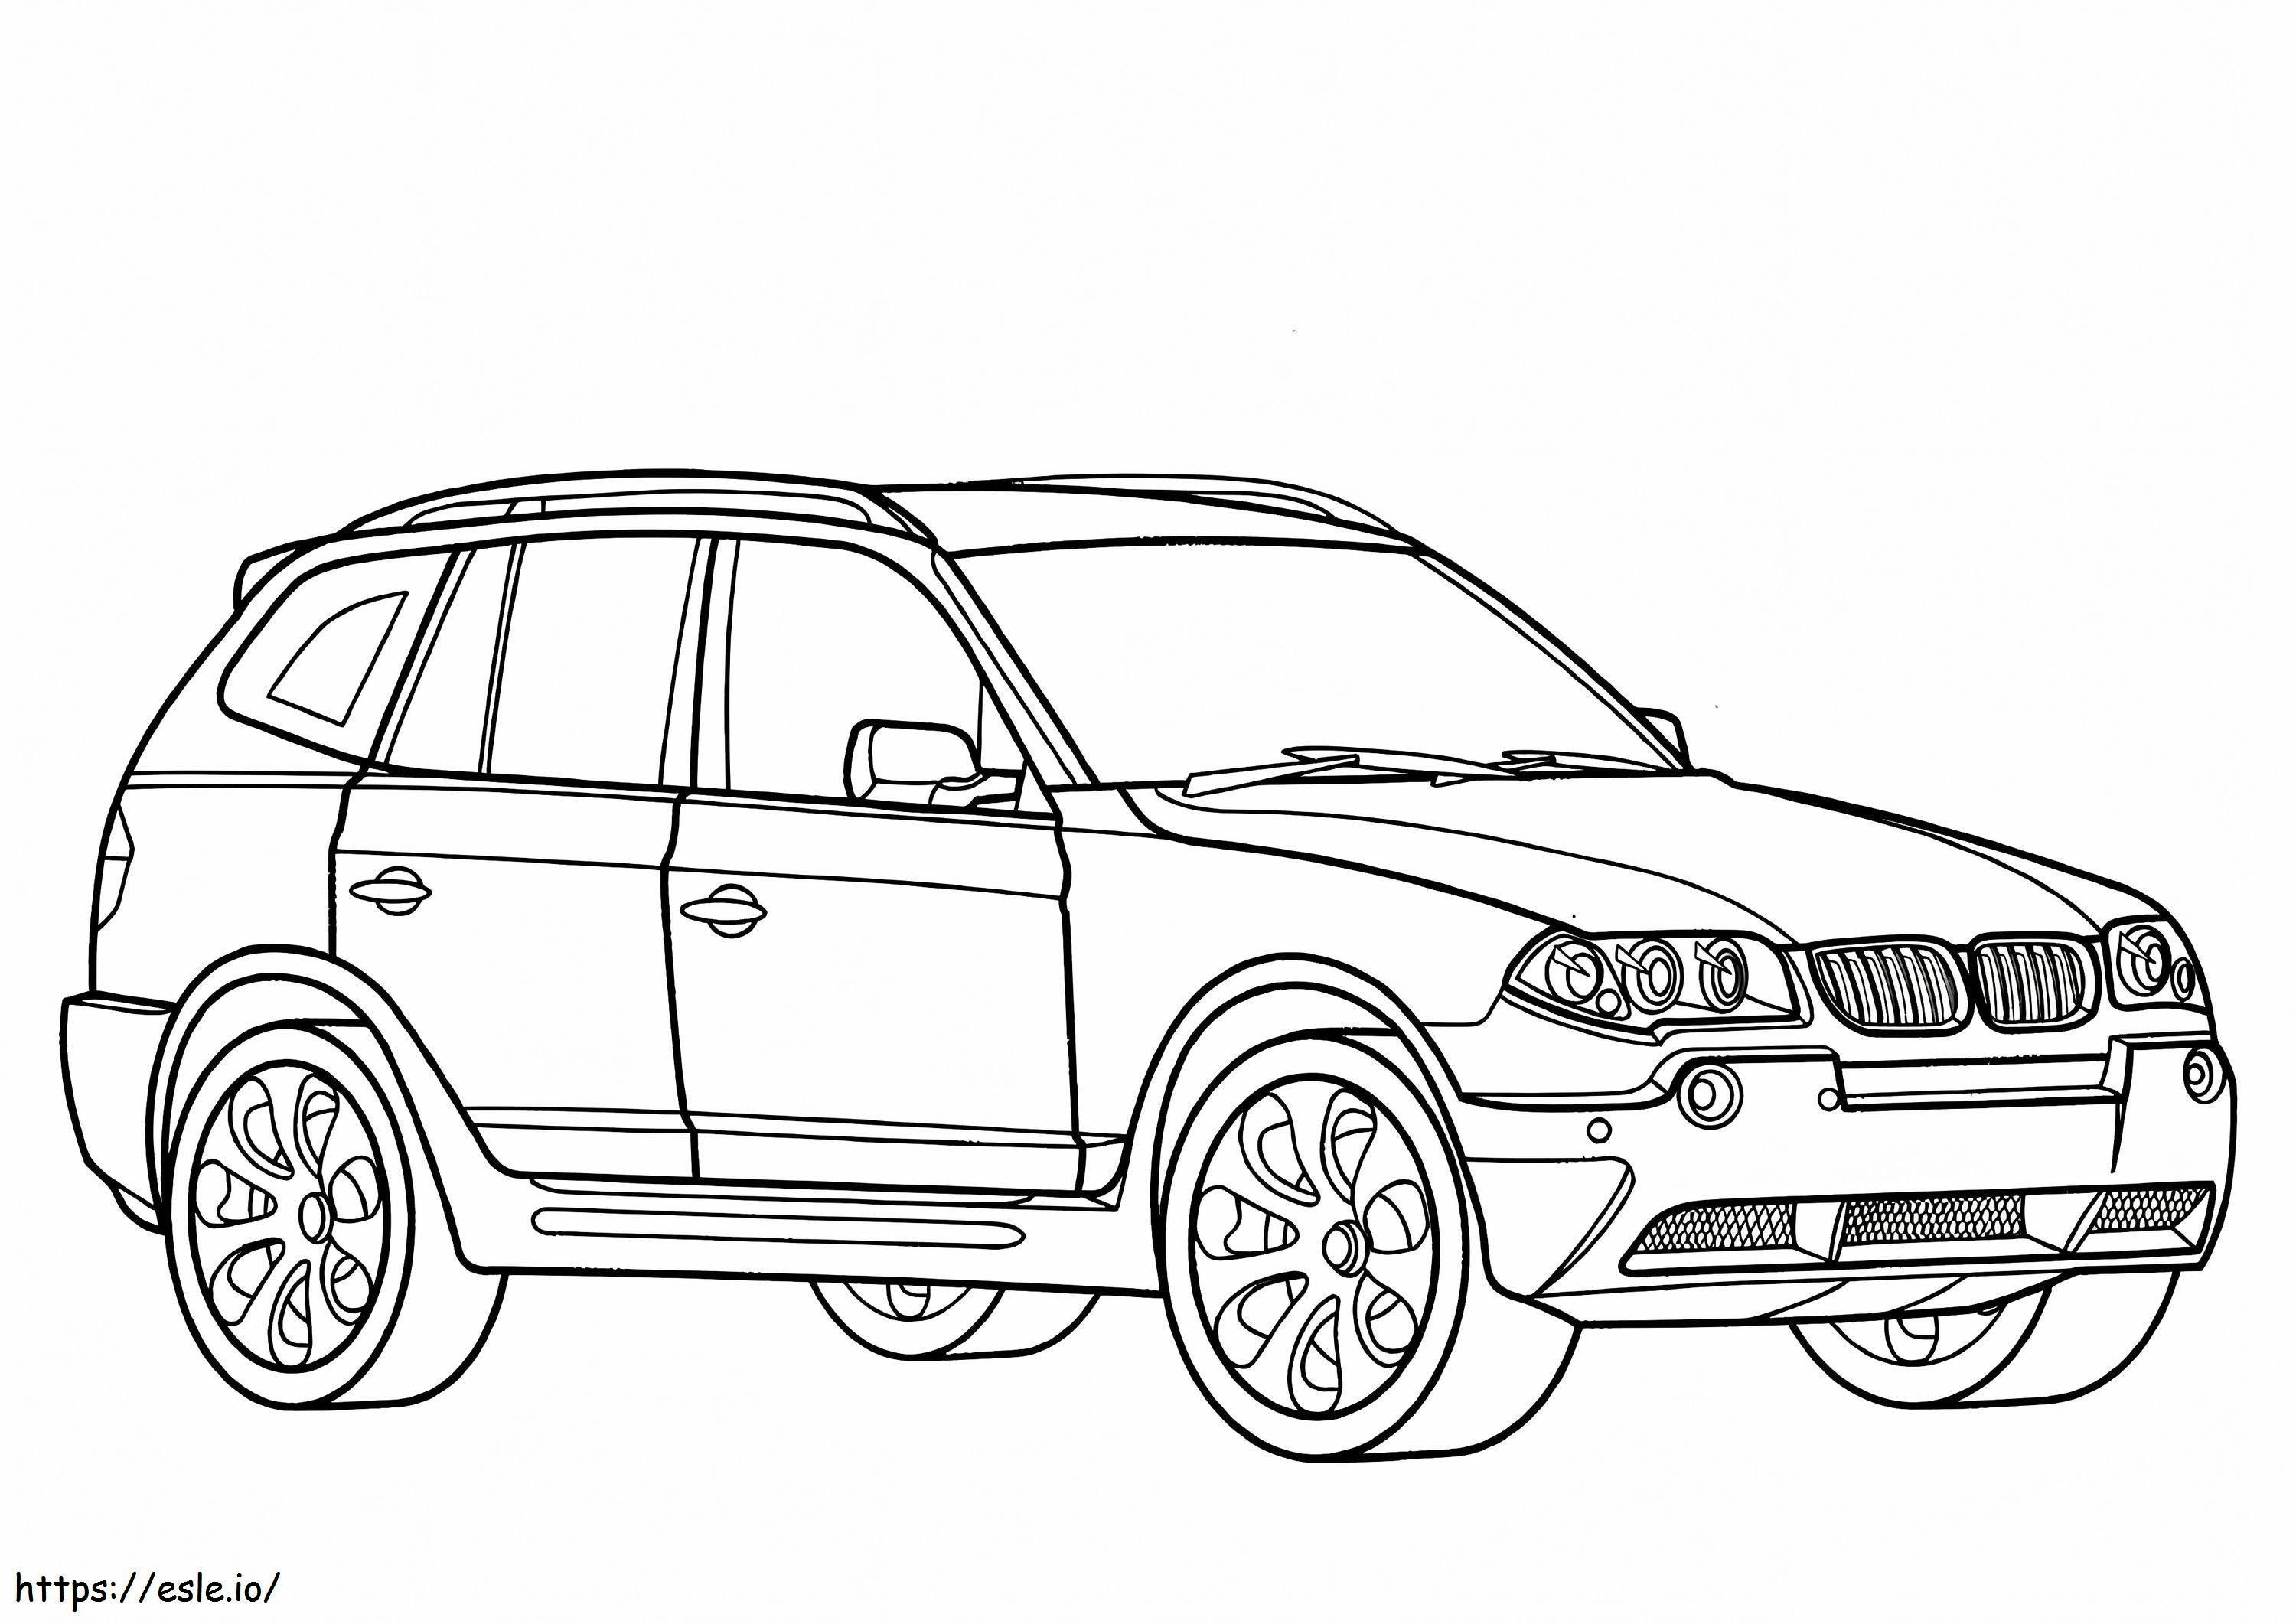 Bmw X3 coloring page